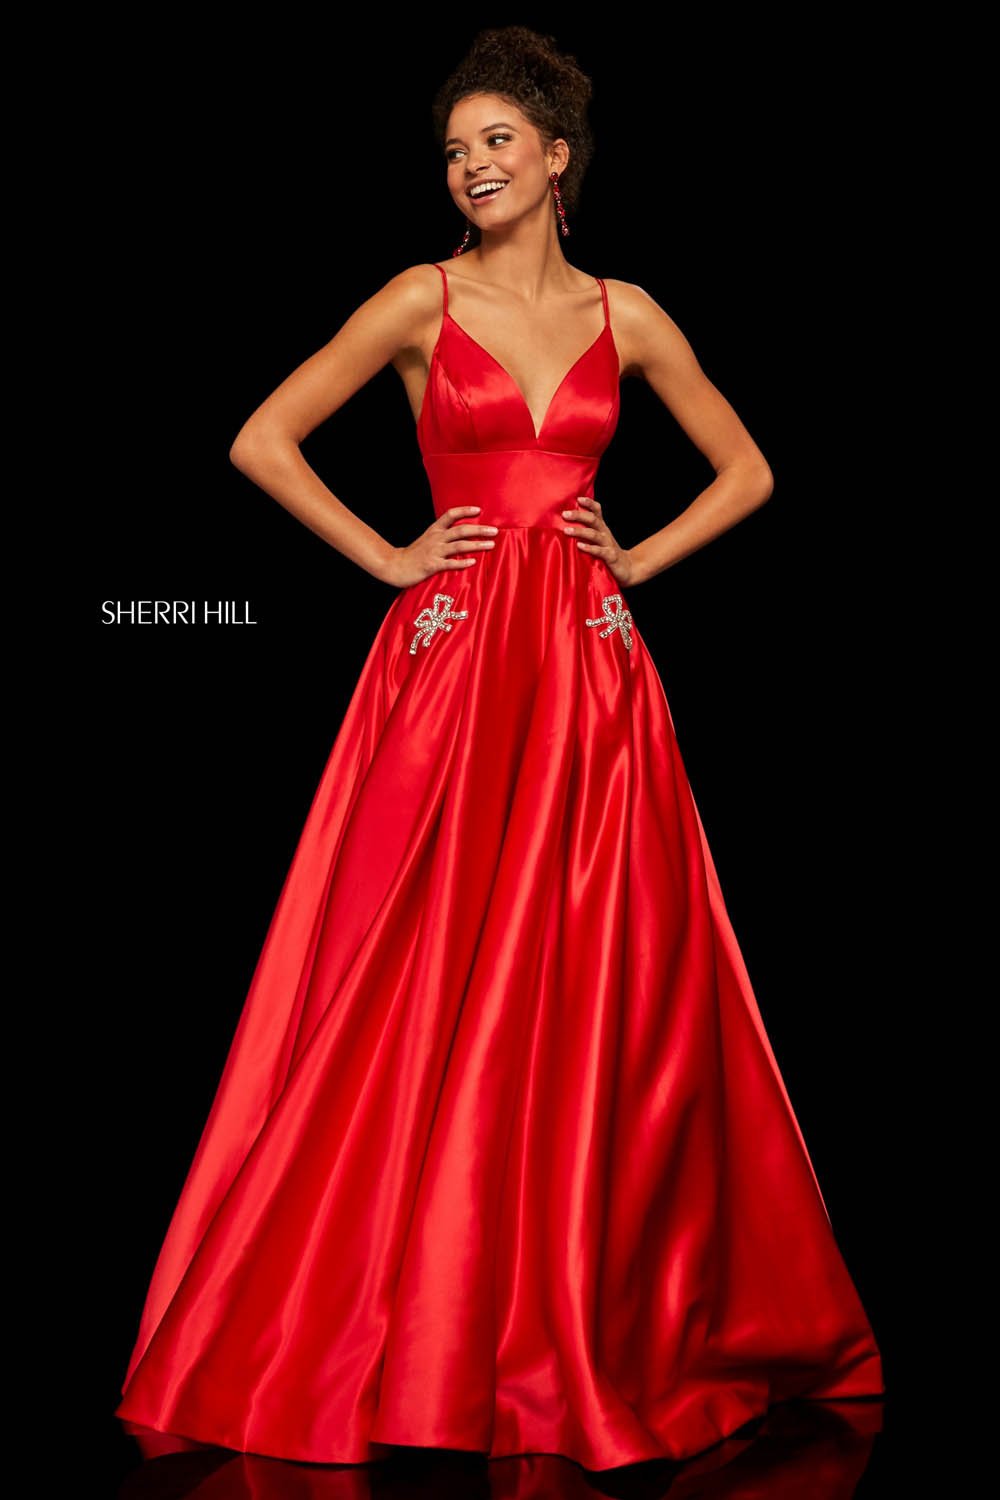 Sherri Hill 52629 dress images in these colors: Red, Dark Coral, Light Blue, Blush, Ivory, Orange, Emerald, Yellow, Royal, Bright Pink, Navy, Black.